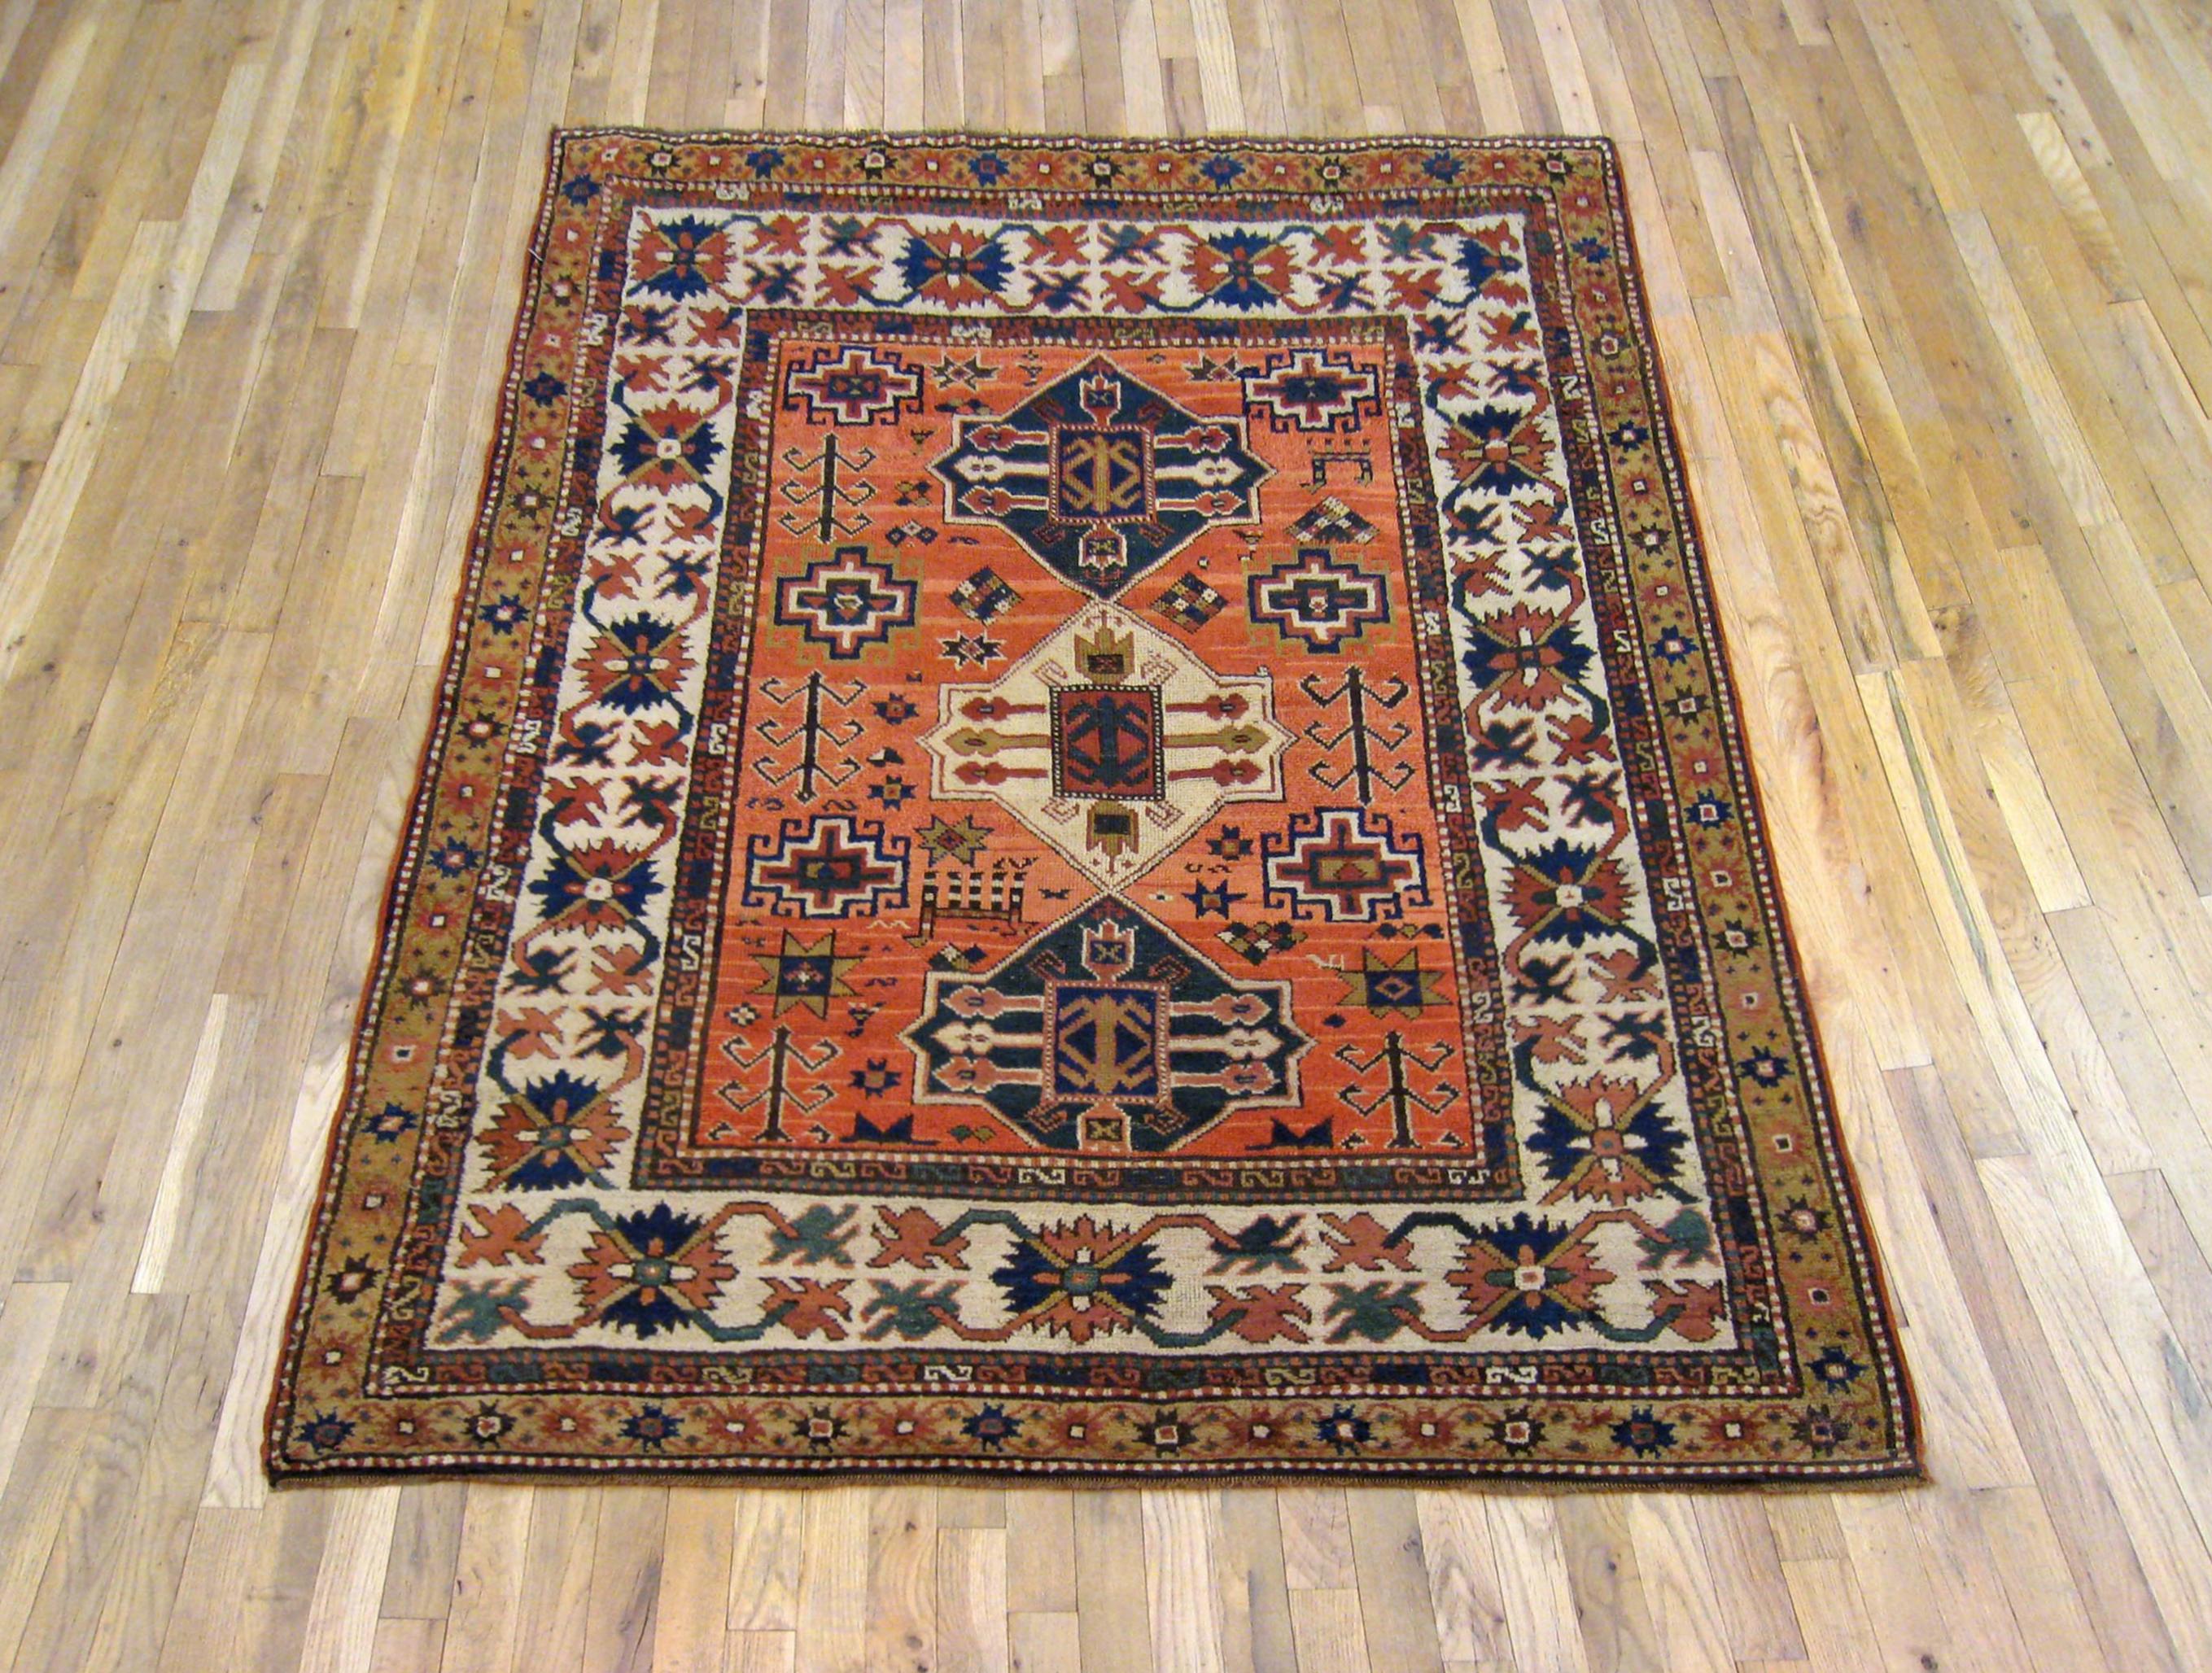 Antique Caucasian Kazak Oriental Carpet, Room size, circa 1890

A one-of-a-kind antique Caucasian Kazak Oriental Carpet, hand-knotted with soft wool pile. This lovely hand-knotted carpet features three geometrical medallions design on the brown red